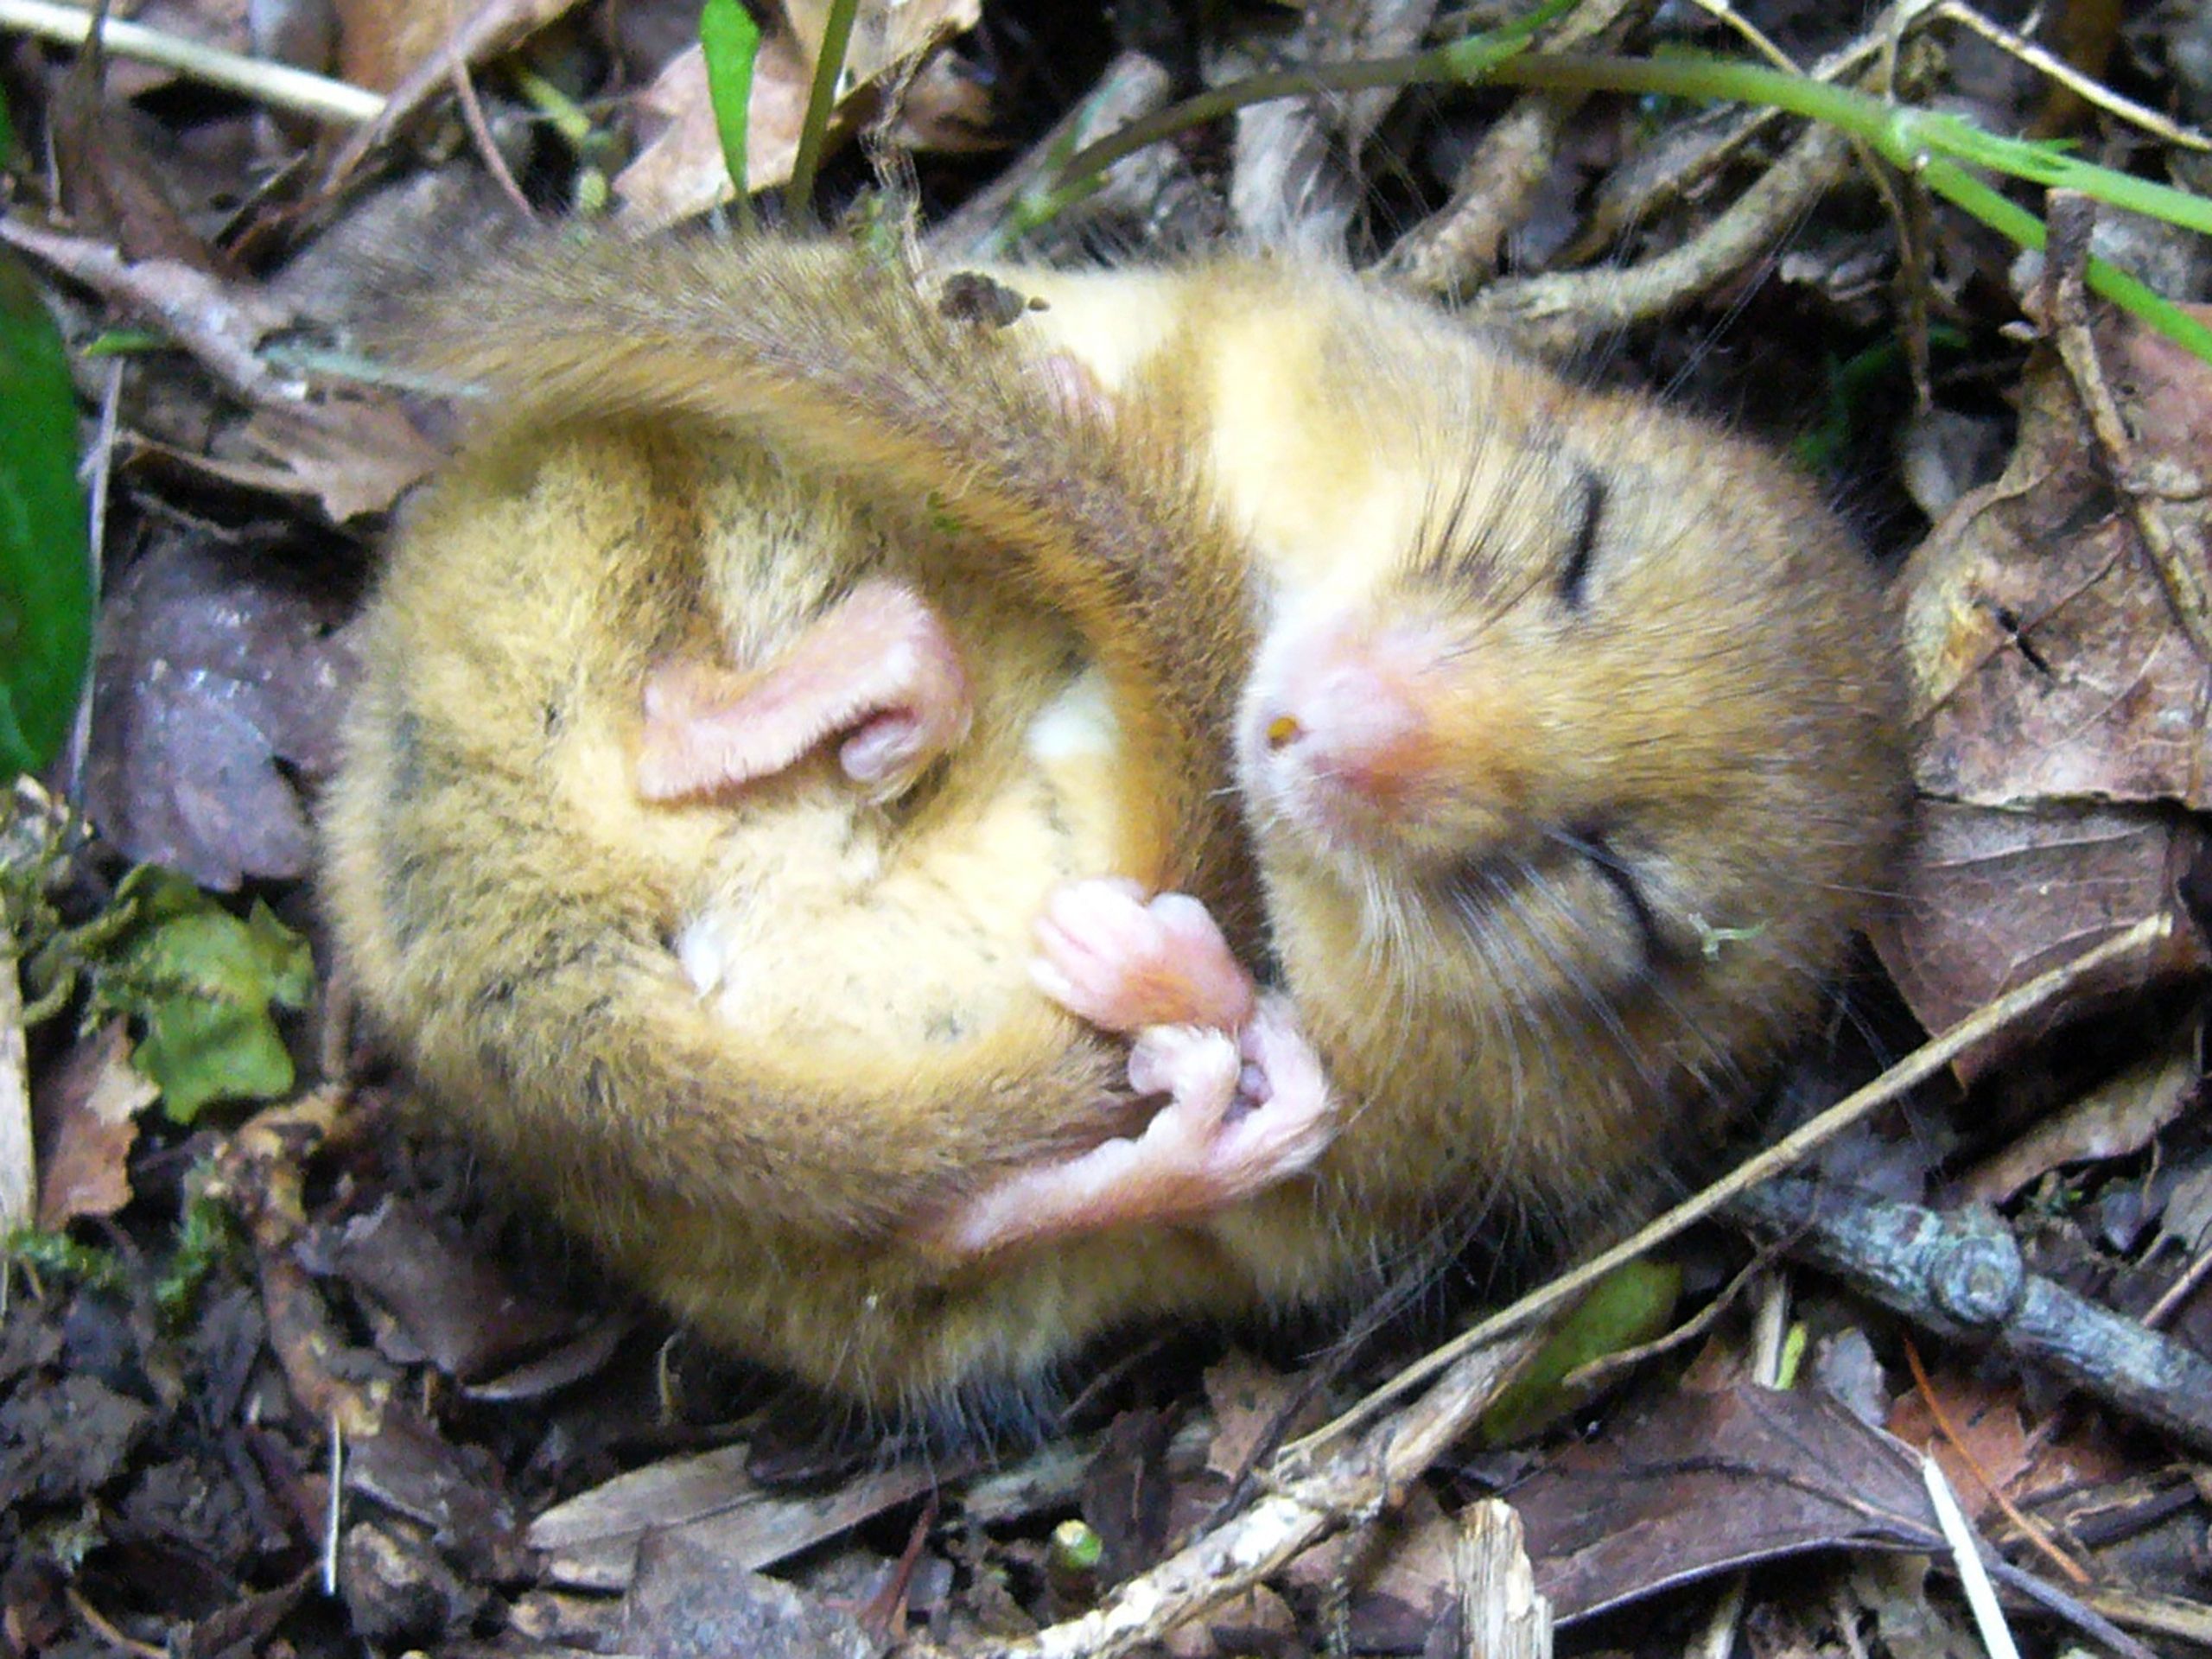 Press release: Is the rare dormouse living at The Community Farm?